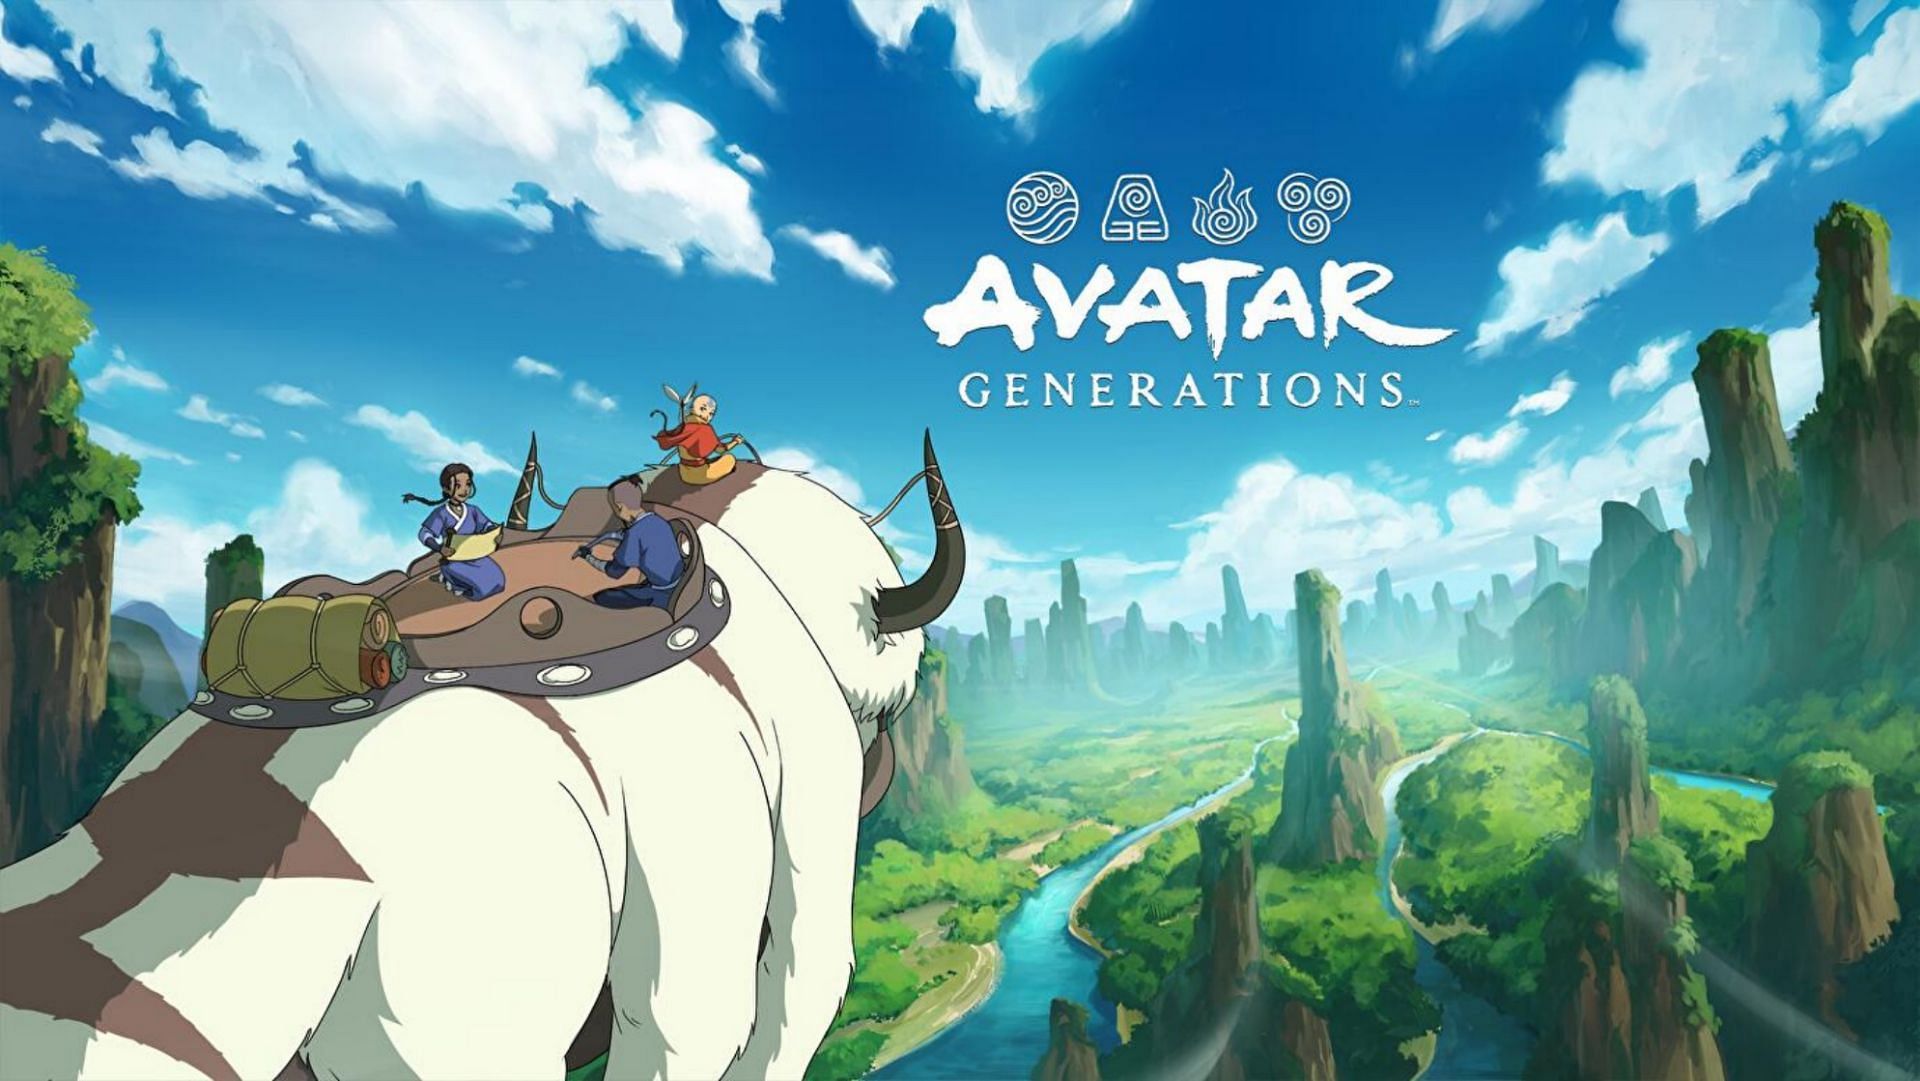 Avatar The Last Airbender creators have big ideas for expanded universe